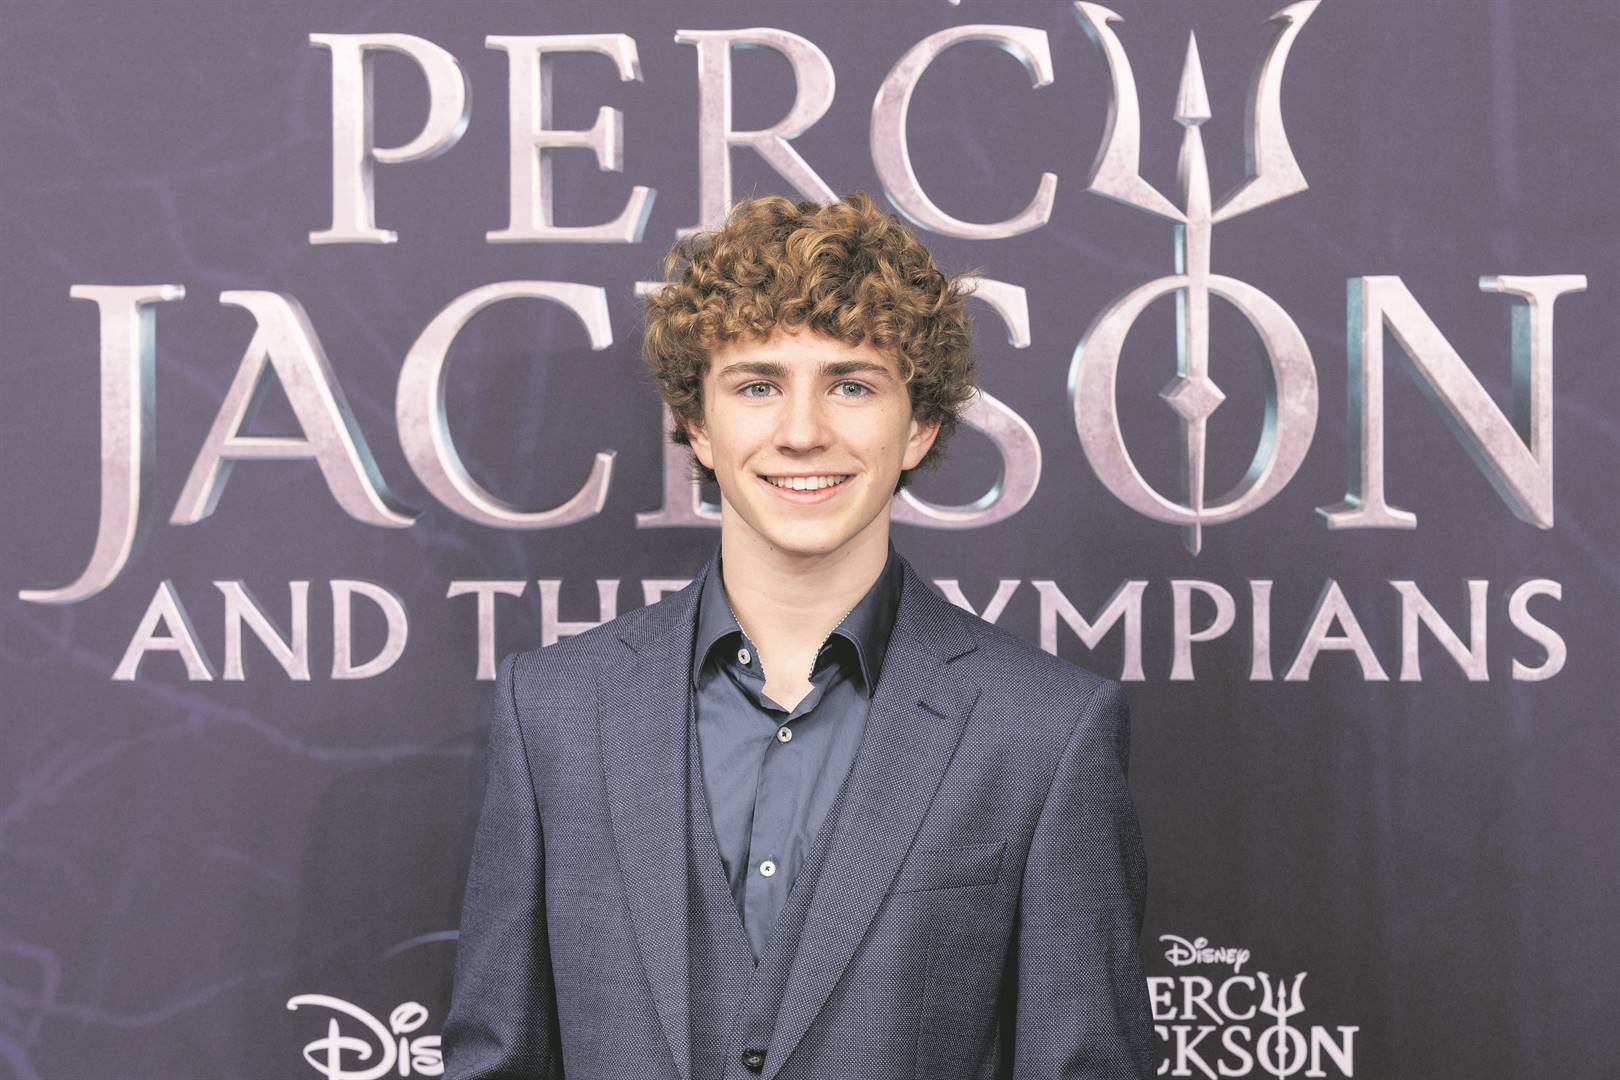 Walker Scobell attends the UK premiere of Percy Jackson and the Olympians at Odeon Luxe Leicester Square in December last year, in London, UK. 